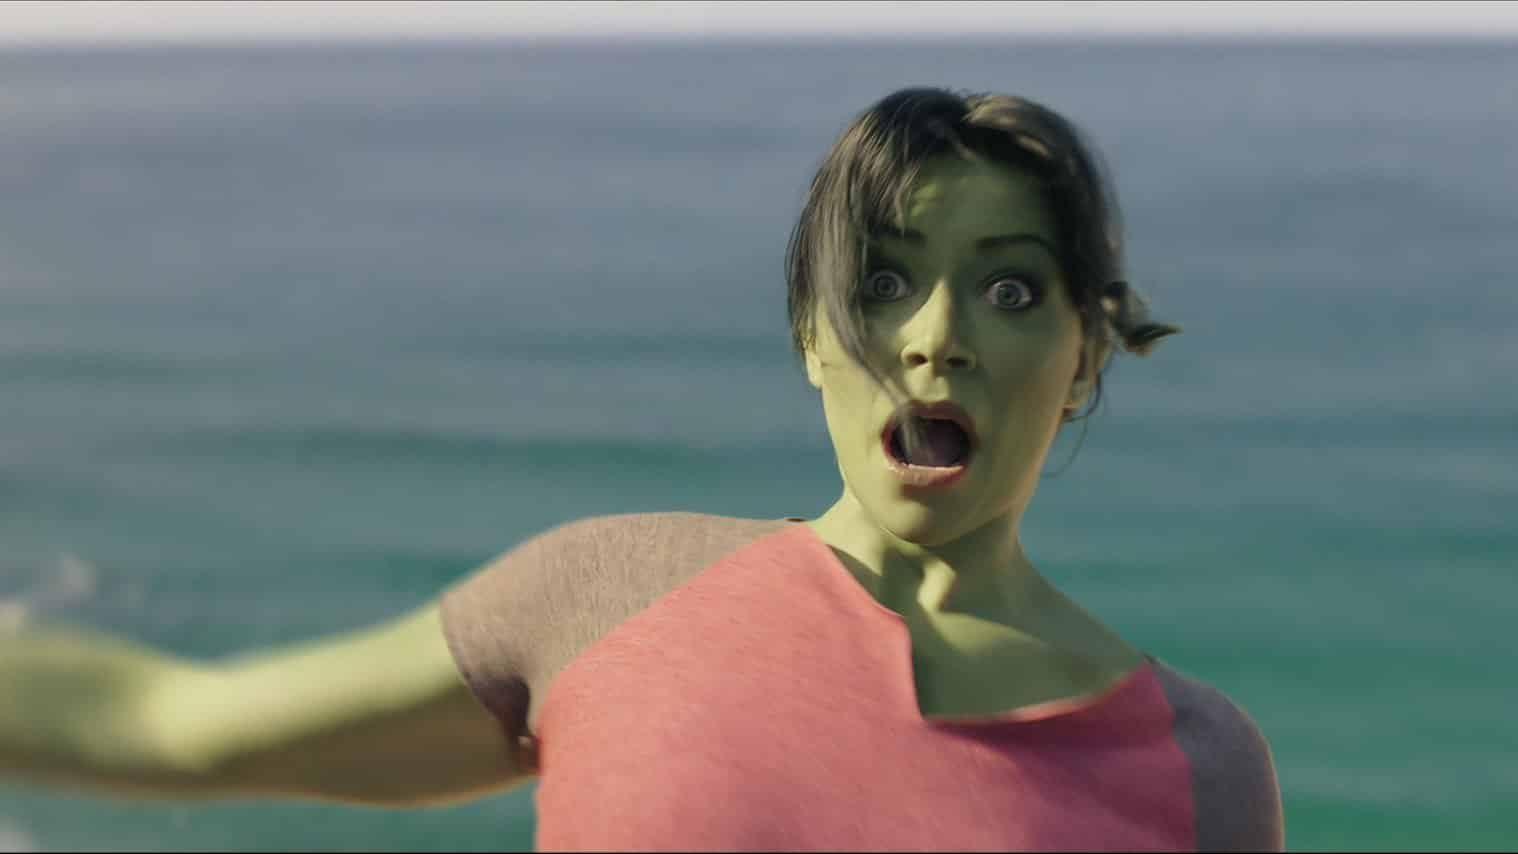 She-Hulk Episodes 1-4 review: A cameo-filled courtroom comedy - Dexerto